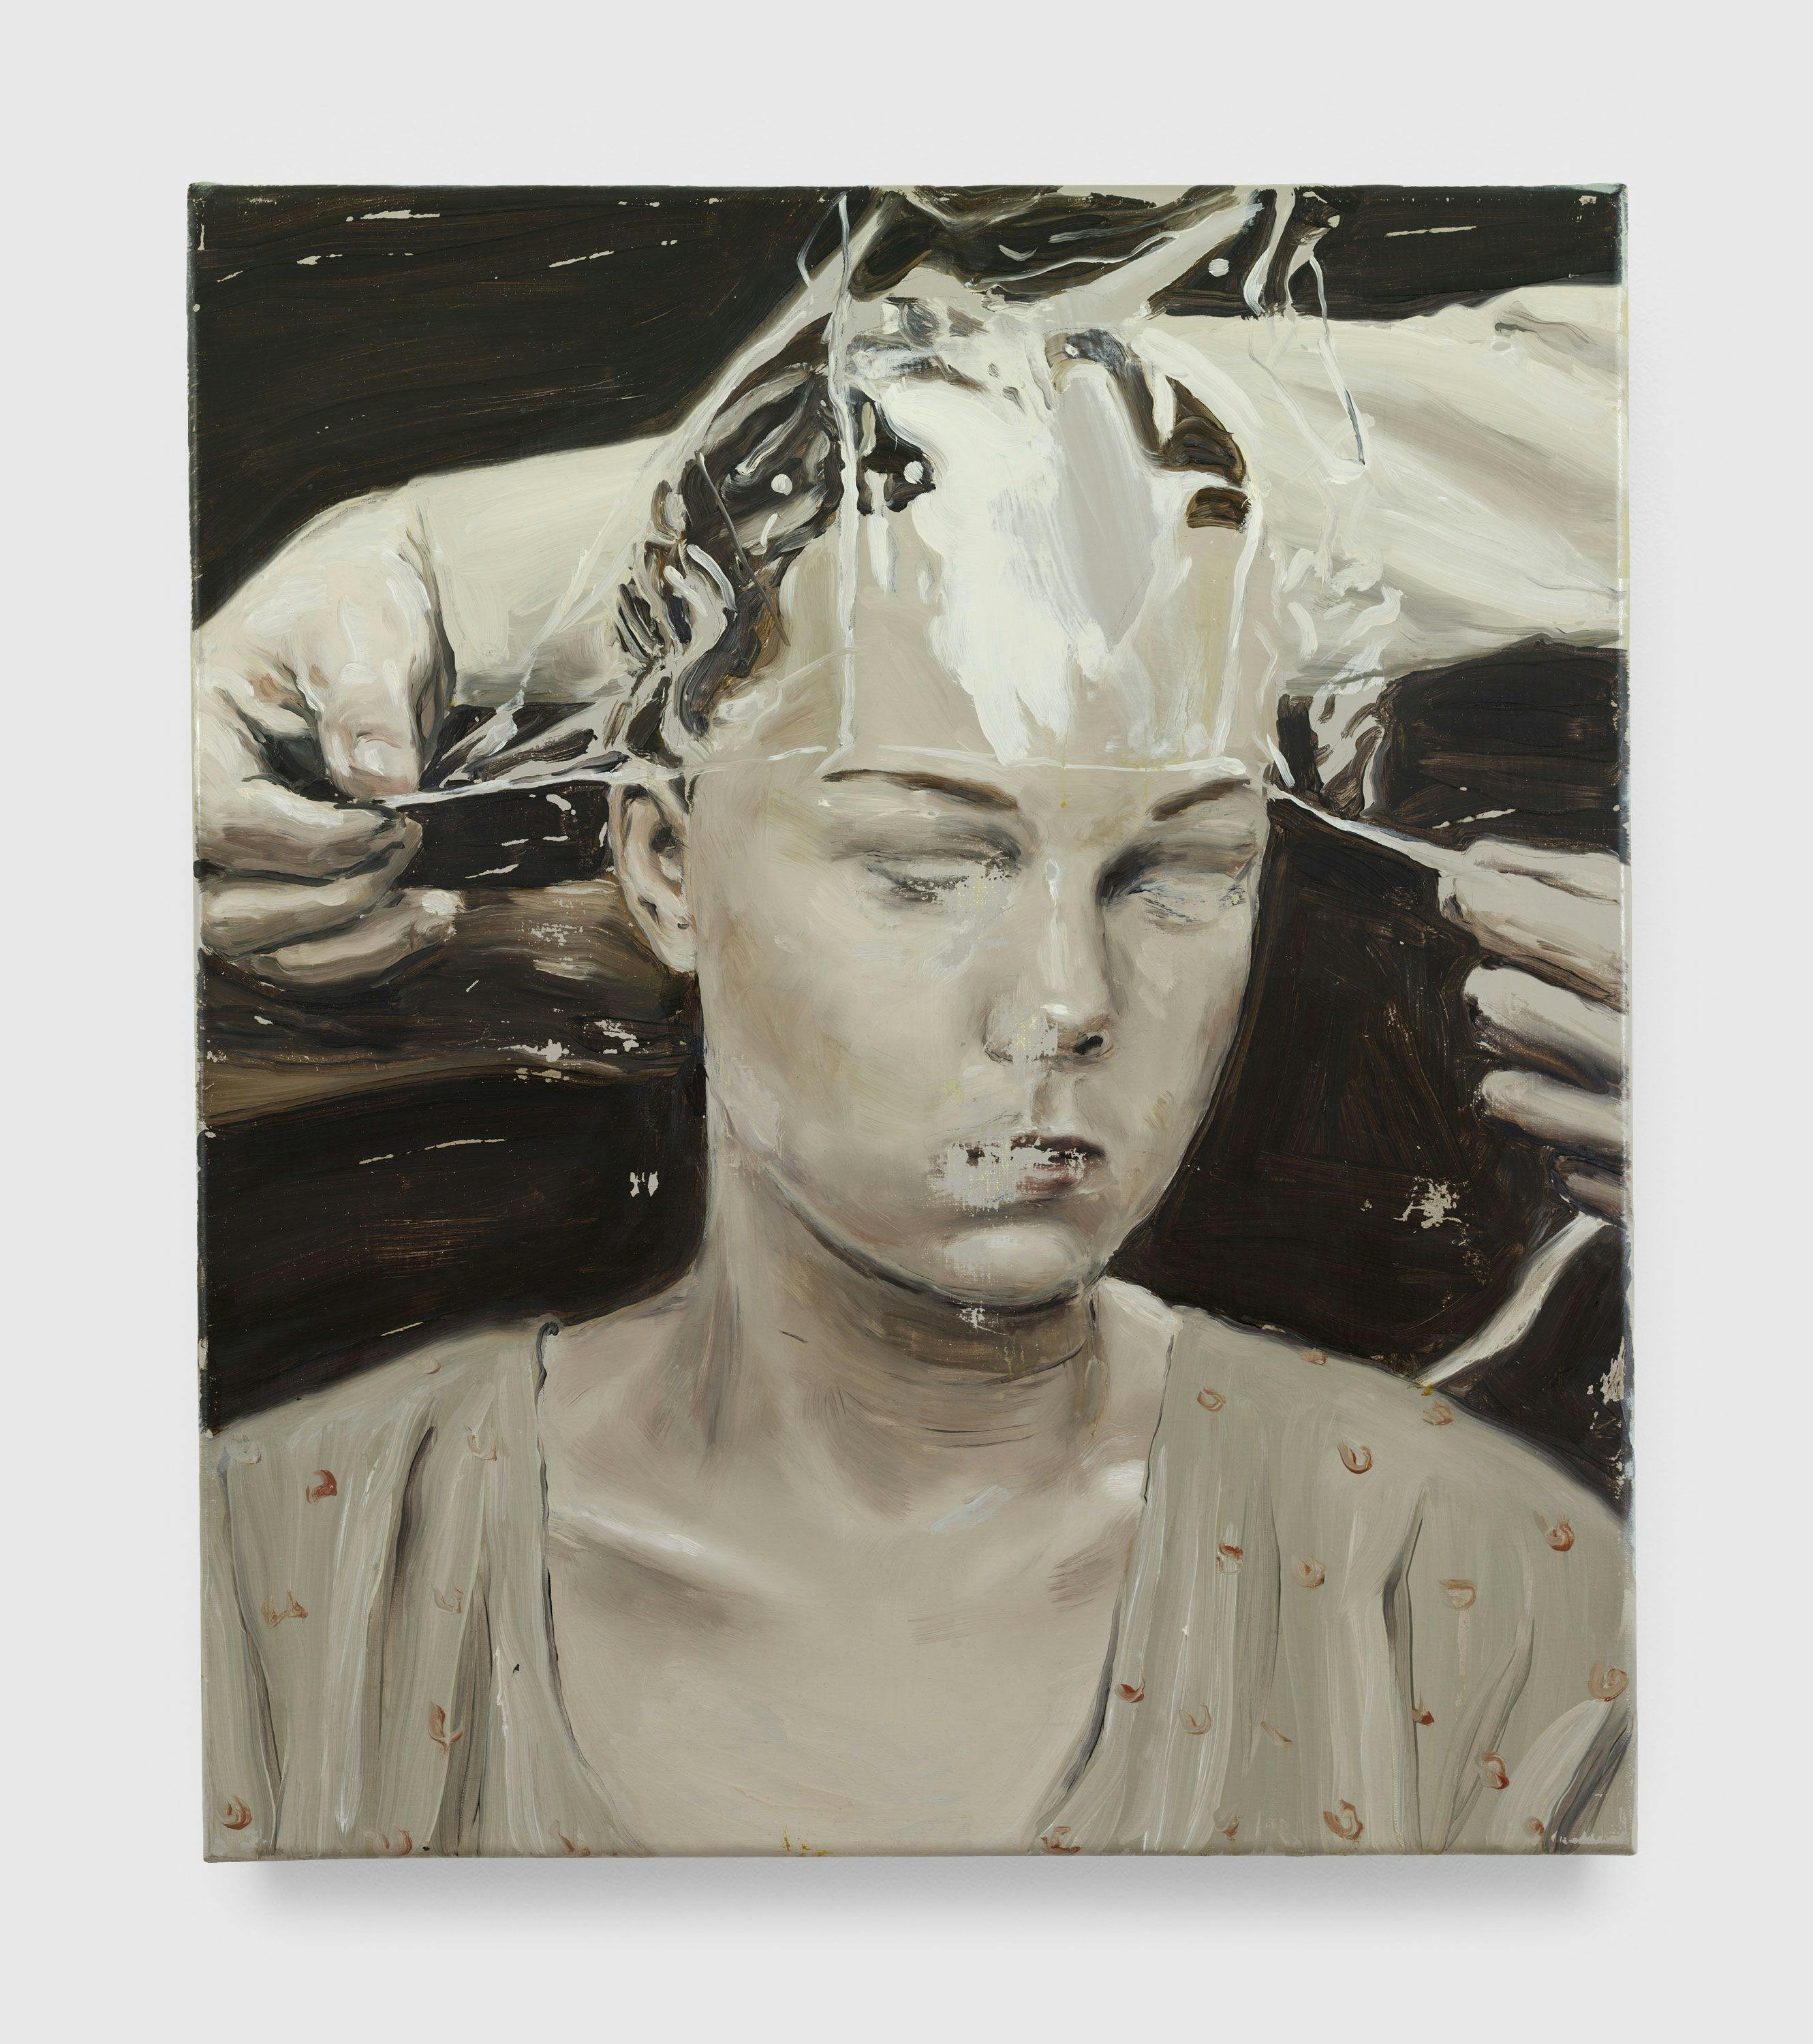 A painting by Michaël Borremans, titled The Preservation, dated 2001.